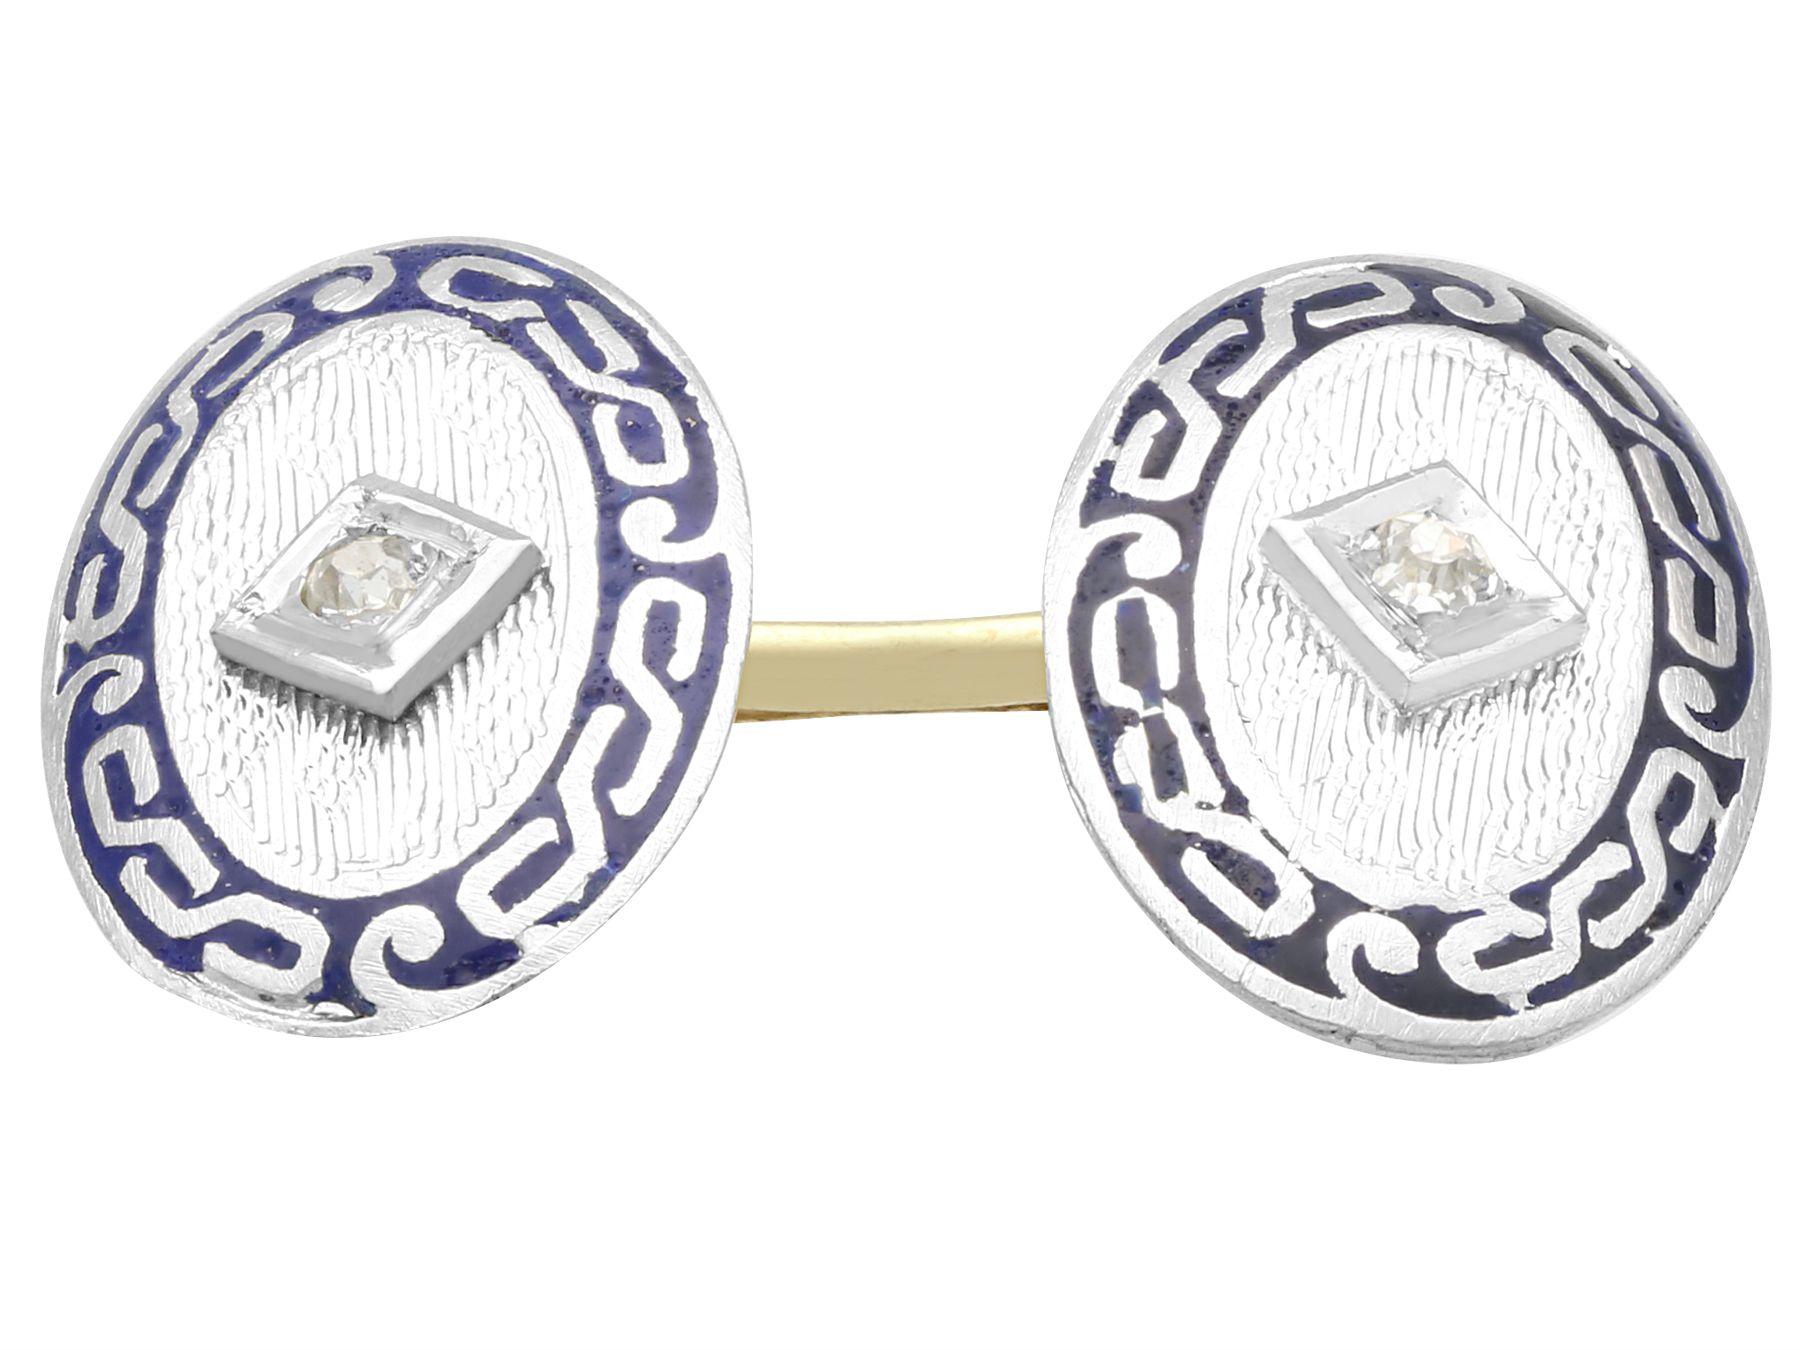 A fine and impressive pair of antique 0.12 carat diamond and blue enamel, 14k yellow gold, platinum set cufflinks; part of our diverse antique jewelry and estate jewelry collections

This impressive pair of cufflinks has been crafted in 14k yellow